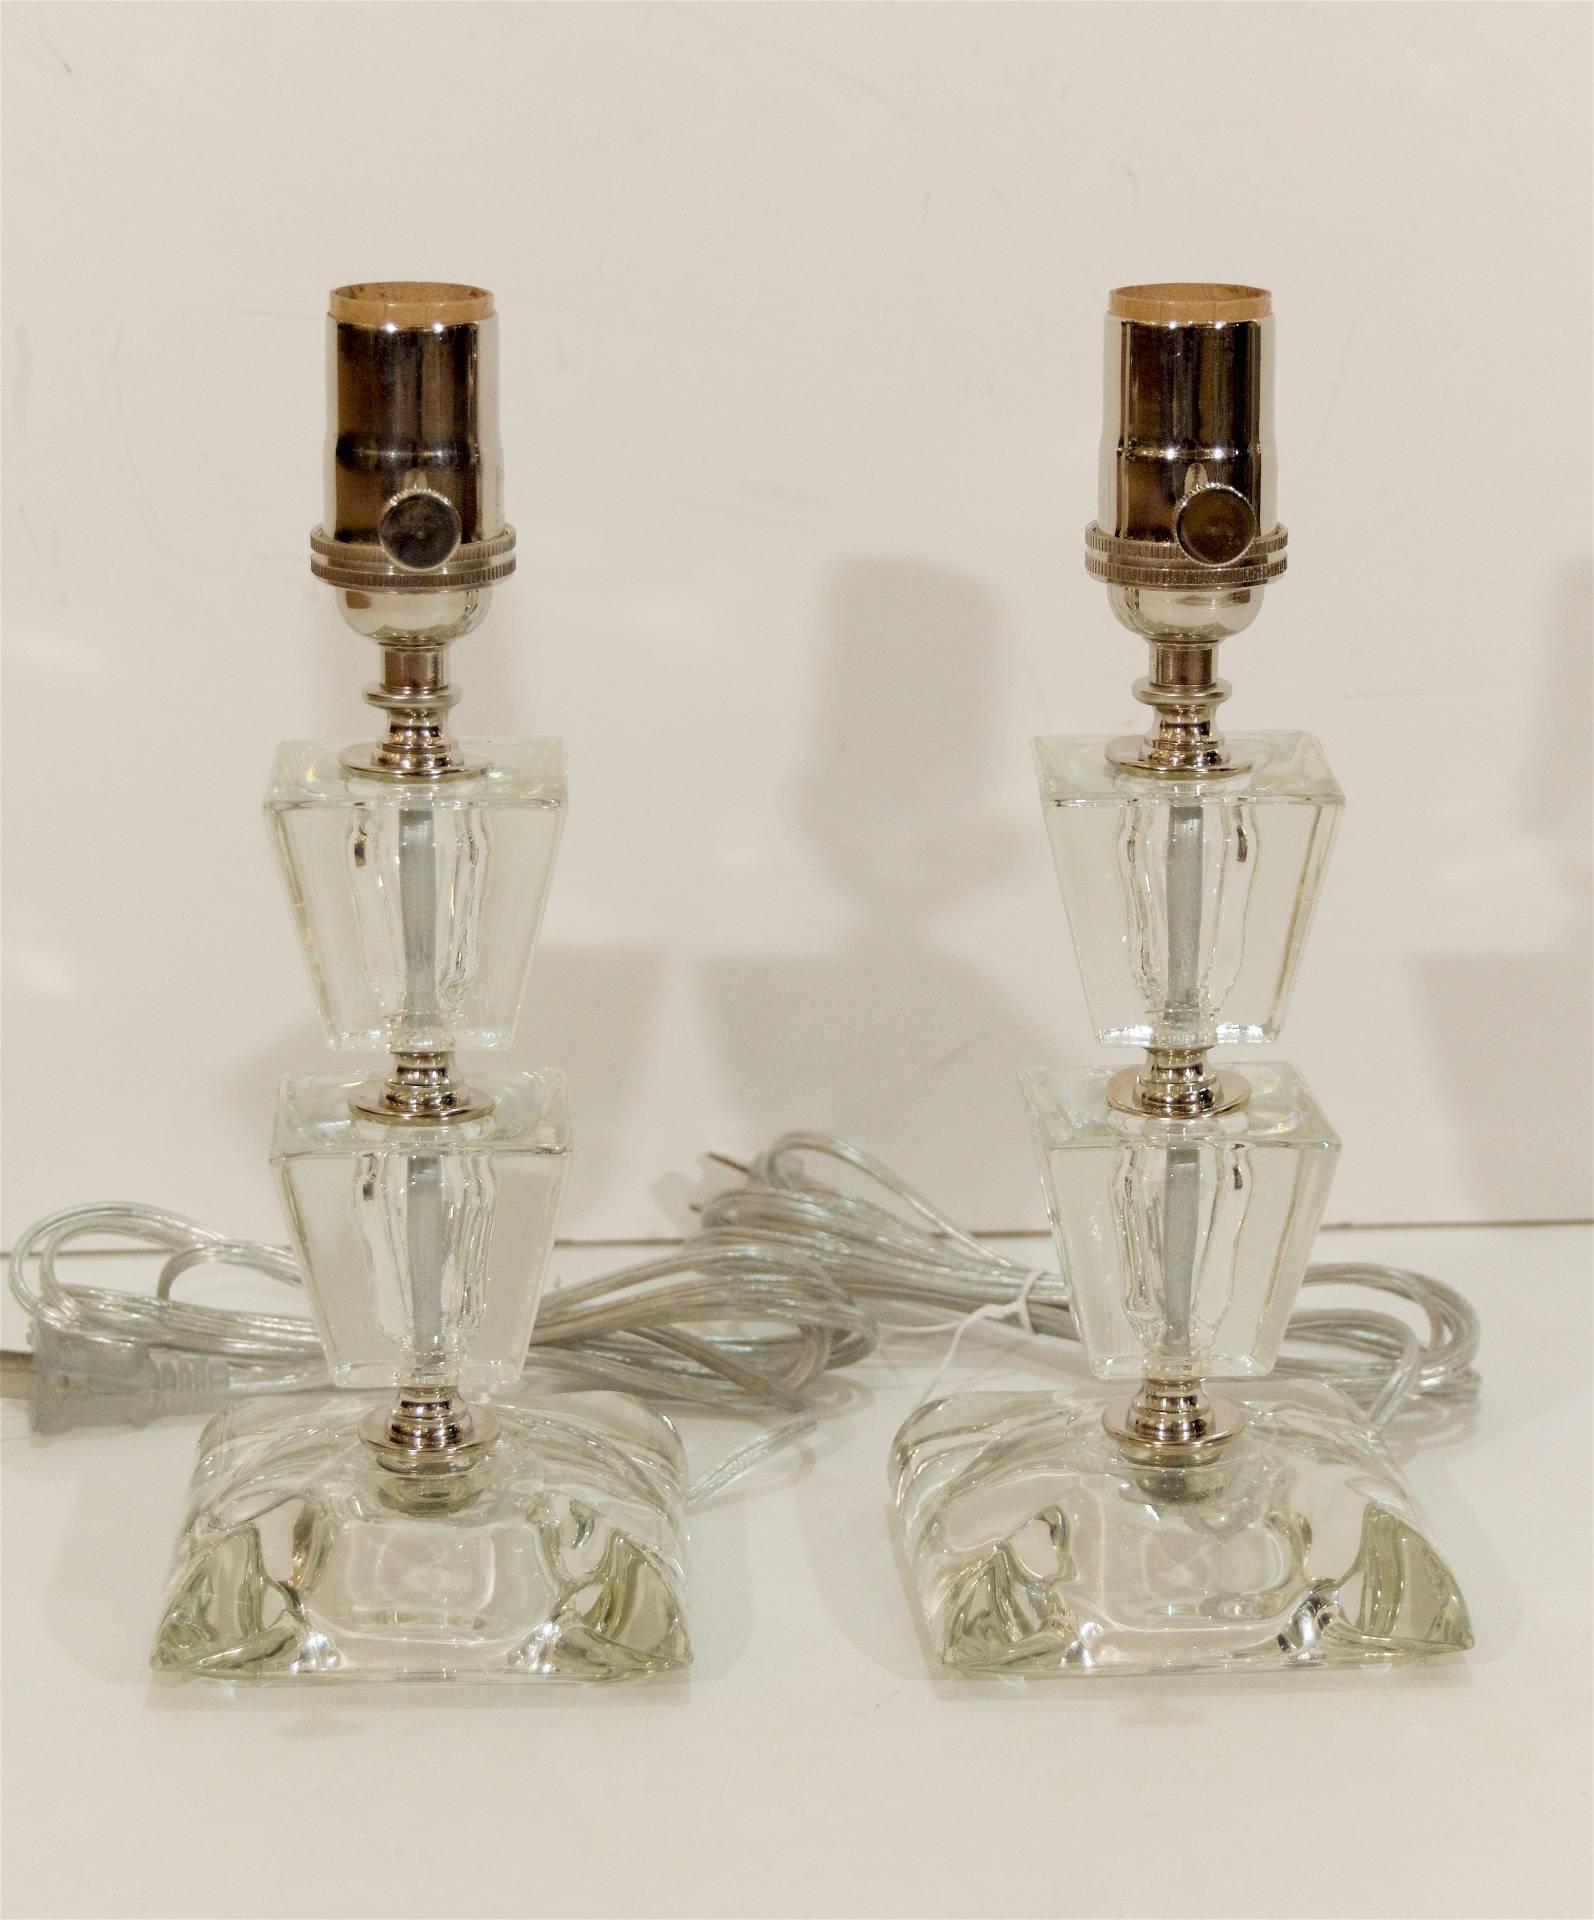 Pair of elegant boudoir lamps, each lamp is comprised of two trapezoidal pieces of crystal separated by chrome spacers on a beveled base.

Takes one medium base bulb up to 100 watts. New wiring. 

Height listed includes a 4.25 inch harp, height